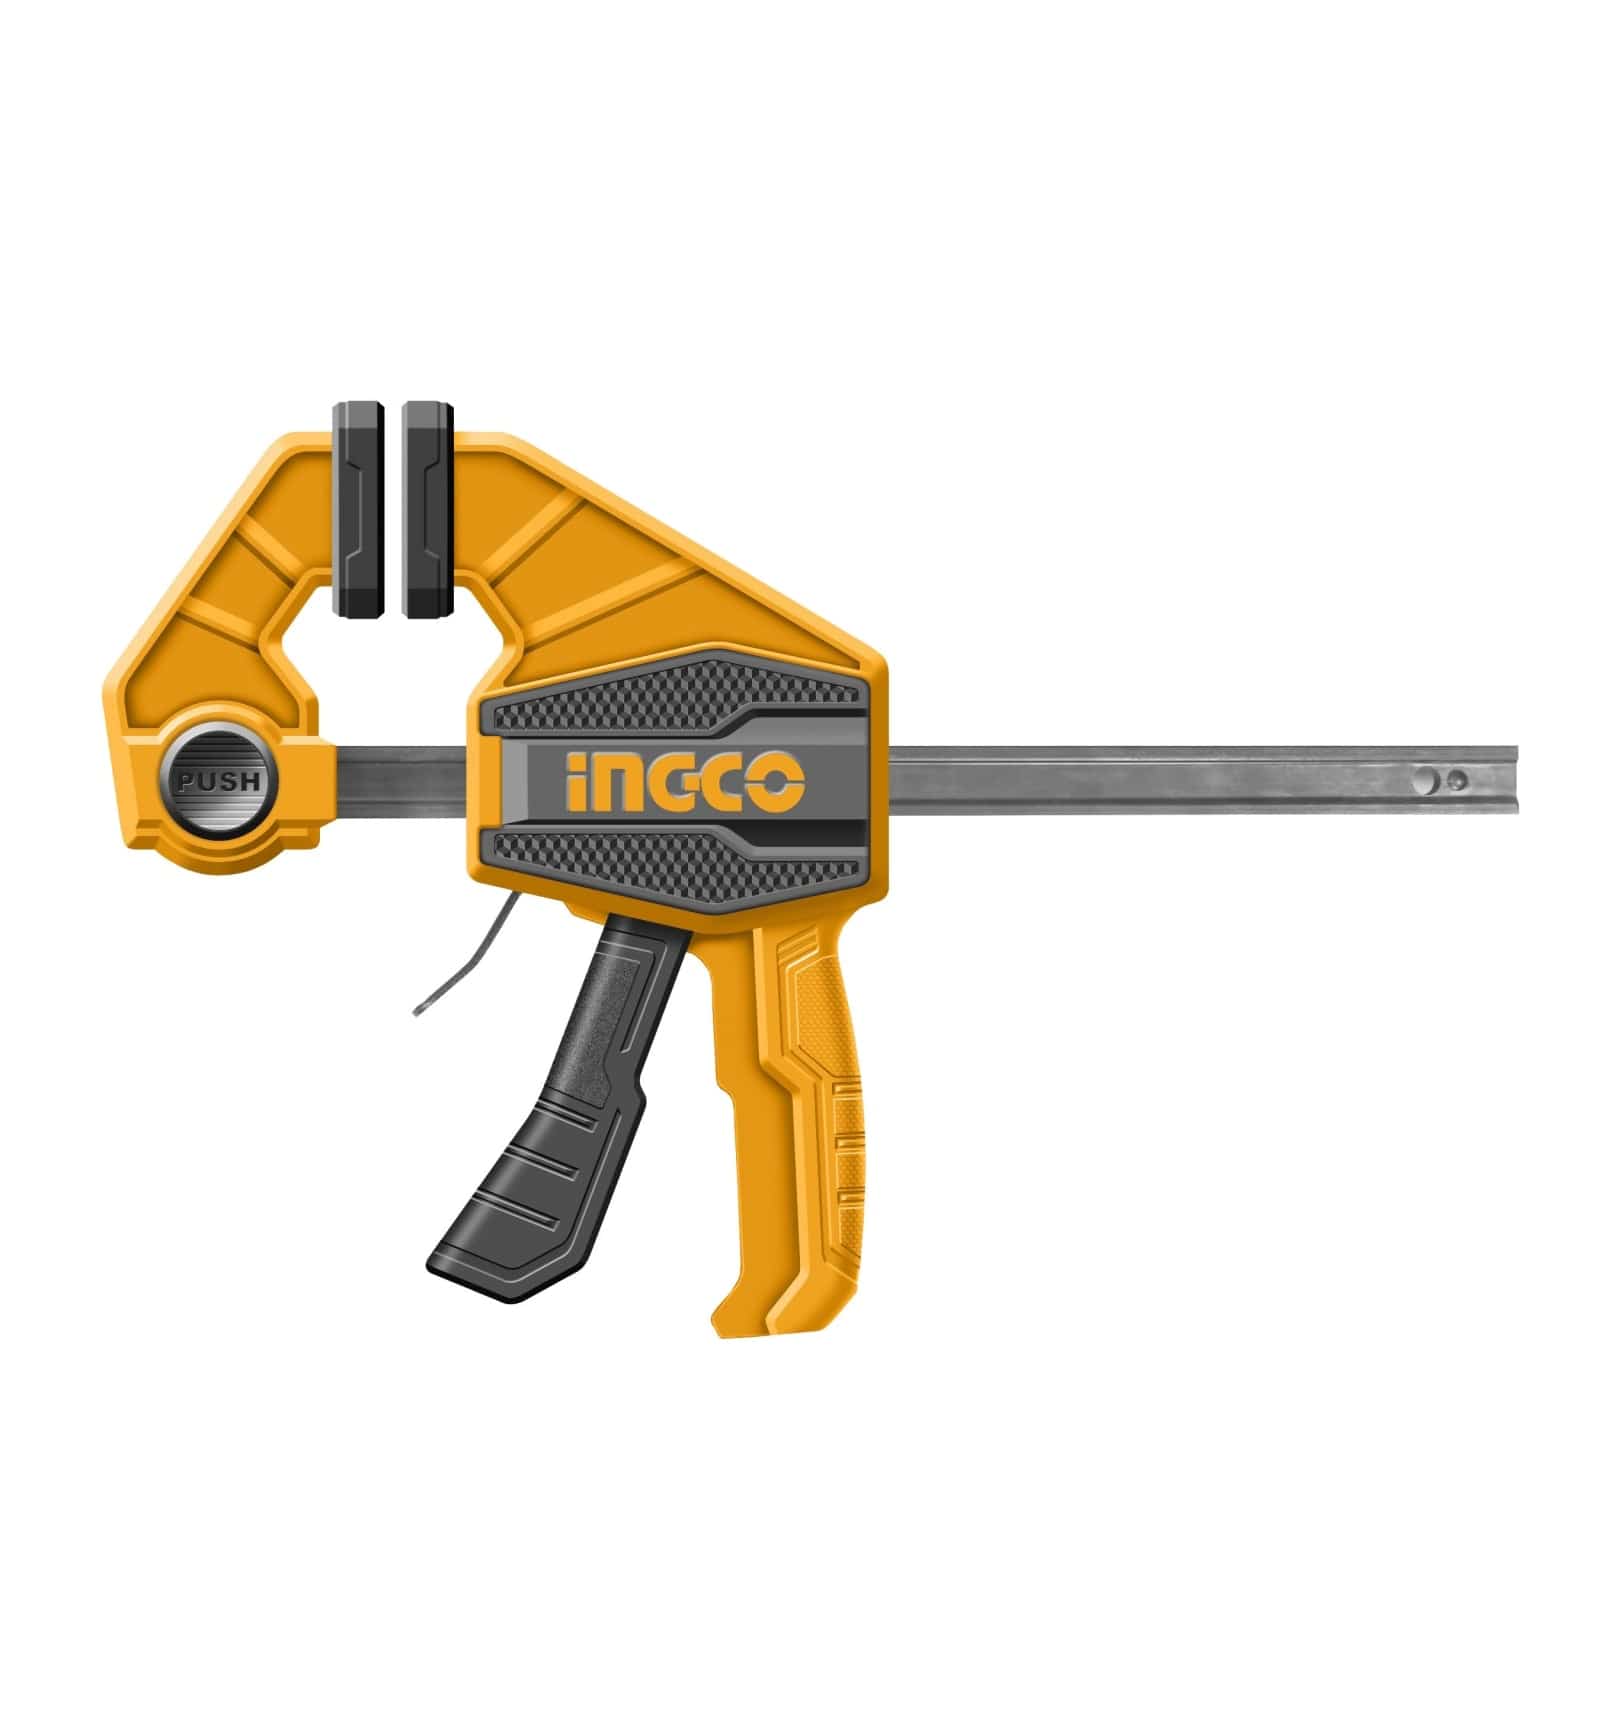 Ingco Quick Bar Clamp | Supply Master | Accra, Ghana Vices & Clamps Buy Tools hardware Building materials